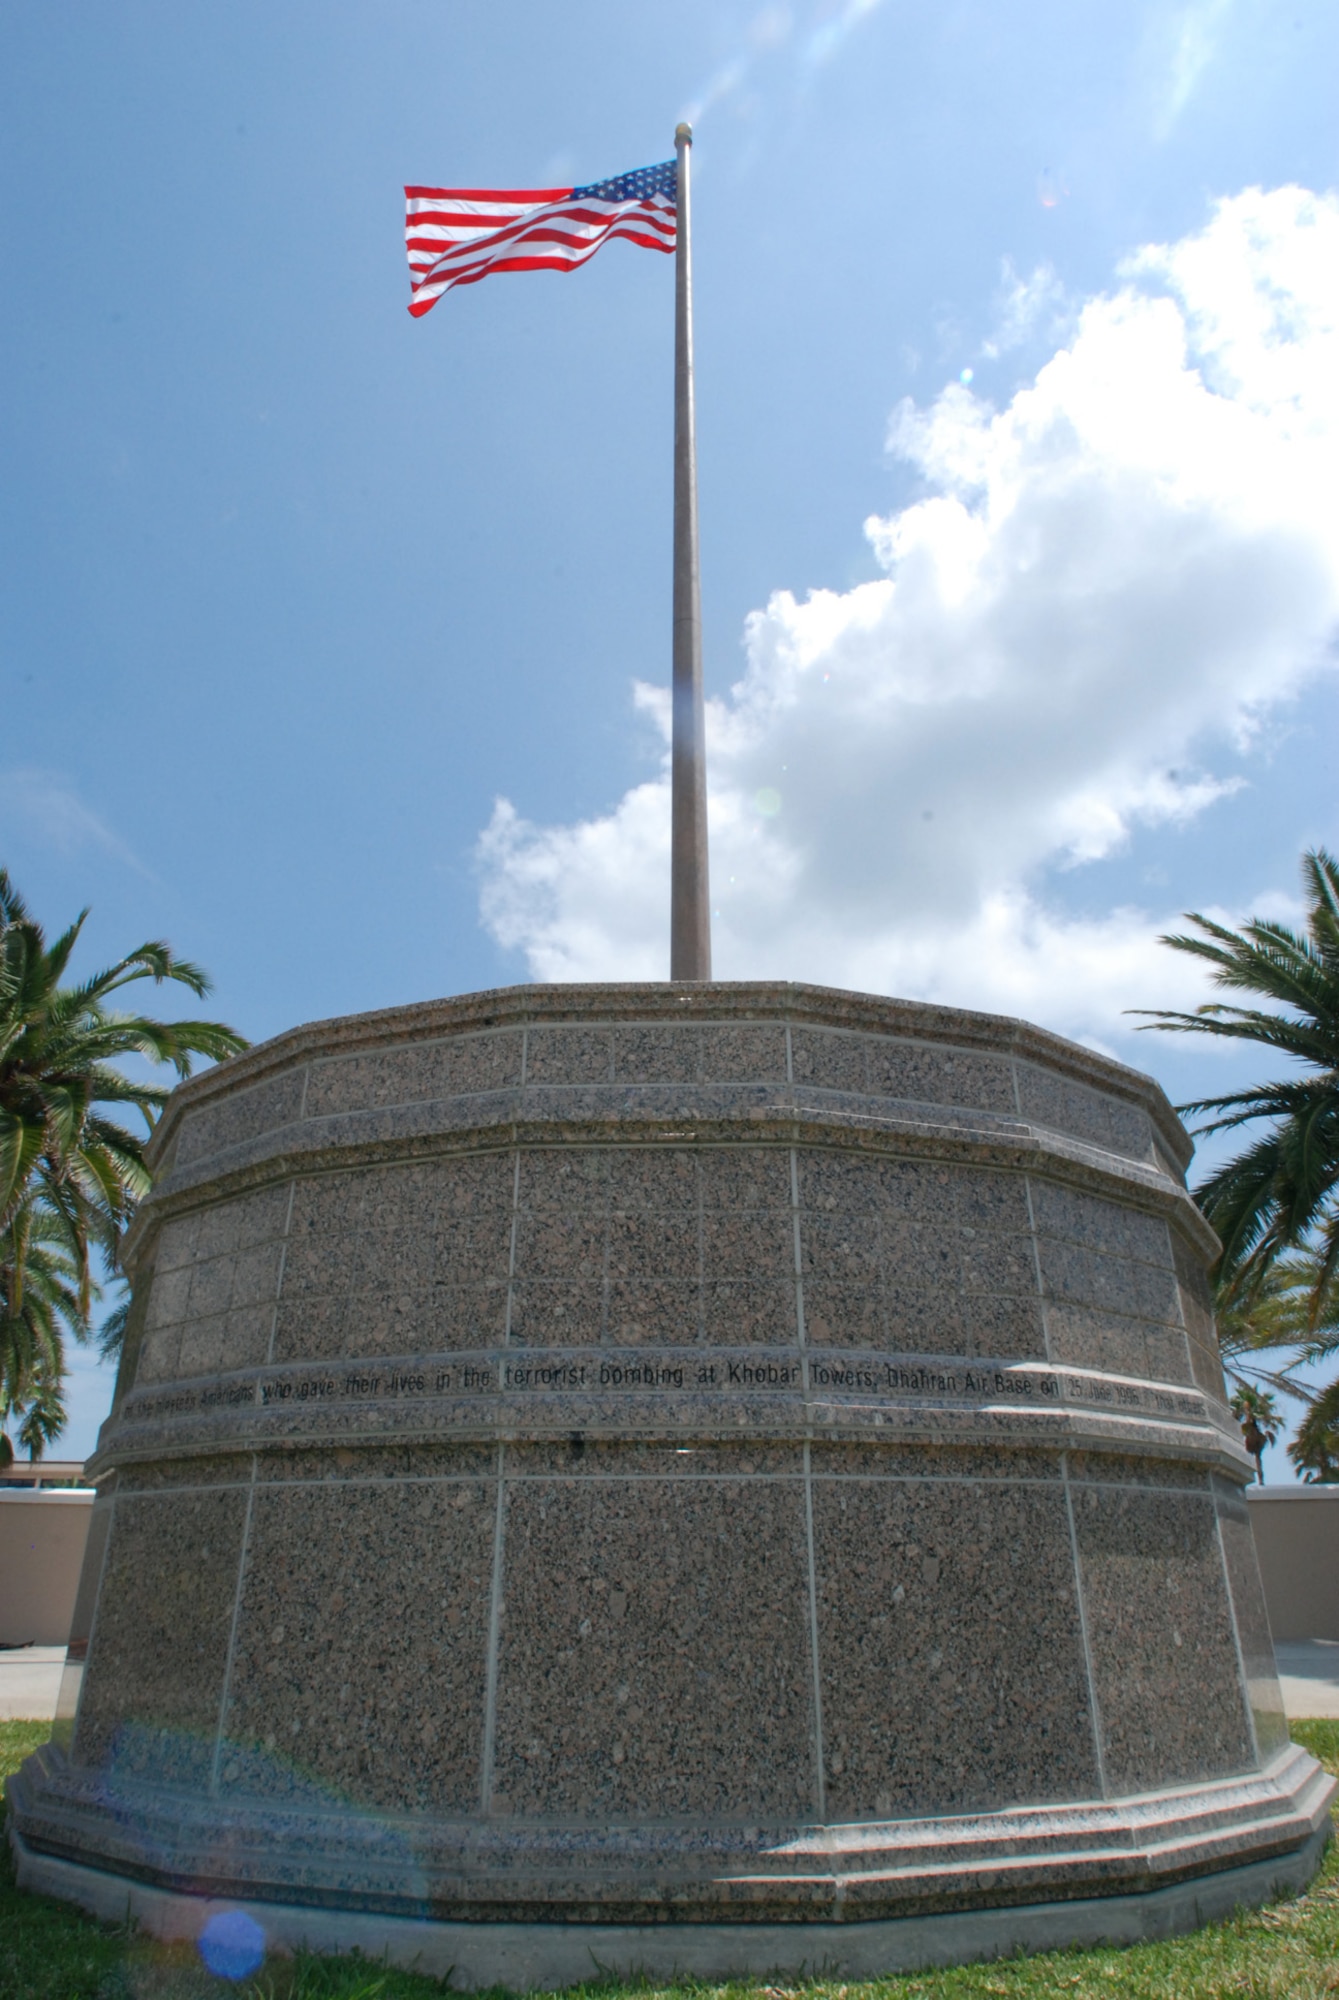 PATRICK AIR FORCE BASE, Fla.- The Khobar Towers memorial is part of many memorials at Memorial Plaza here. It symbolizes the 5 airmen from Patrick AFB that lost their lives at Khobar Towers. Engraved in the memorial is the following:  "In honor of the 19 Americans who gave their lives in the terrorist bombing at Khobar Towers, Dhahran Air Base on 25 June 1996... 'that others may live'".